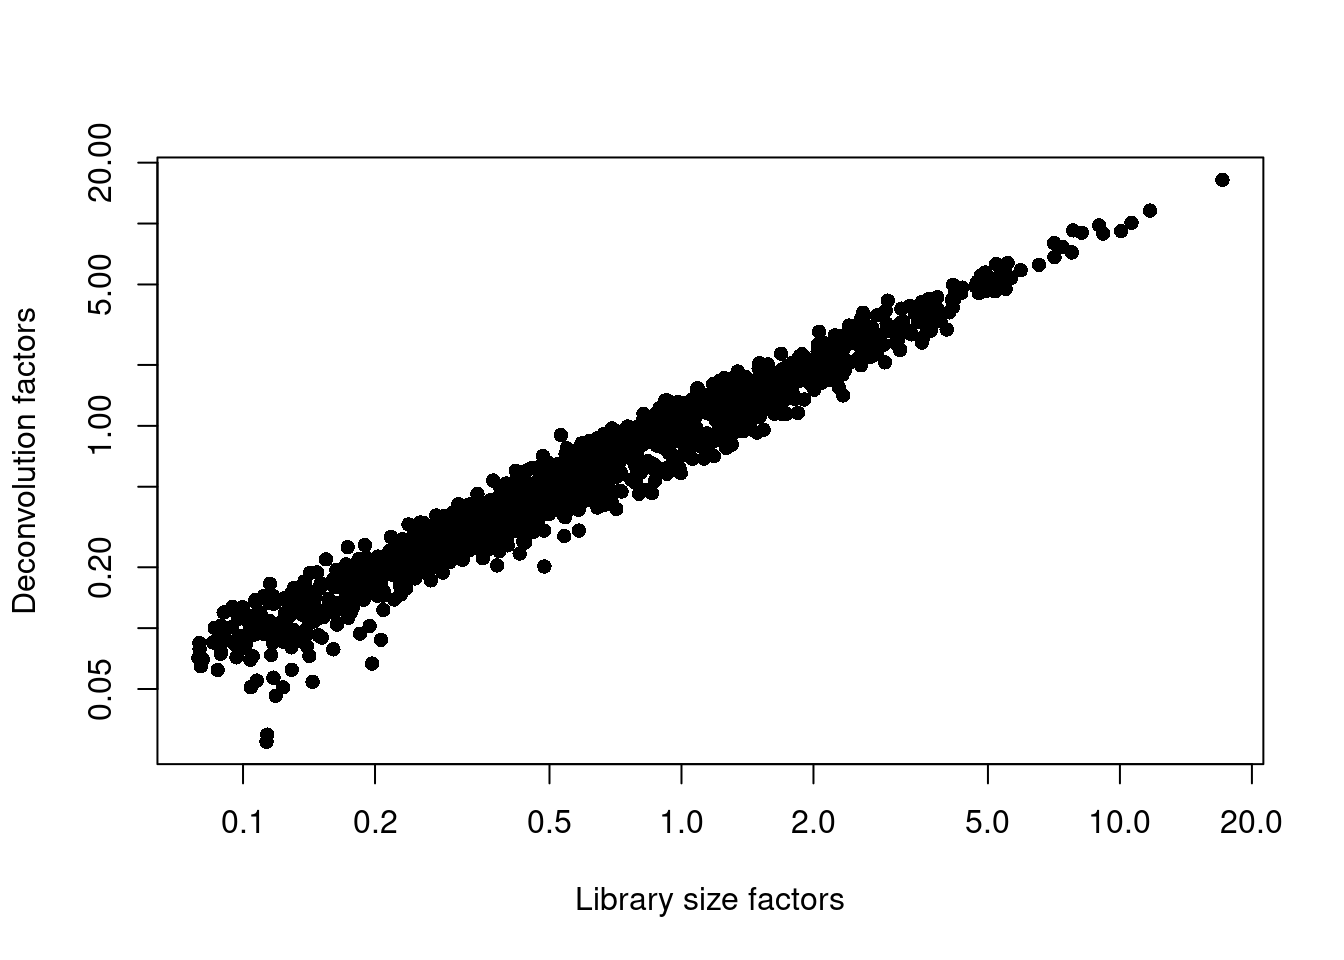 Relationship between the library size factors and the deconvolution size factors in the Grun HSC dataset.